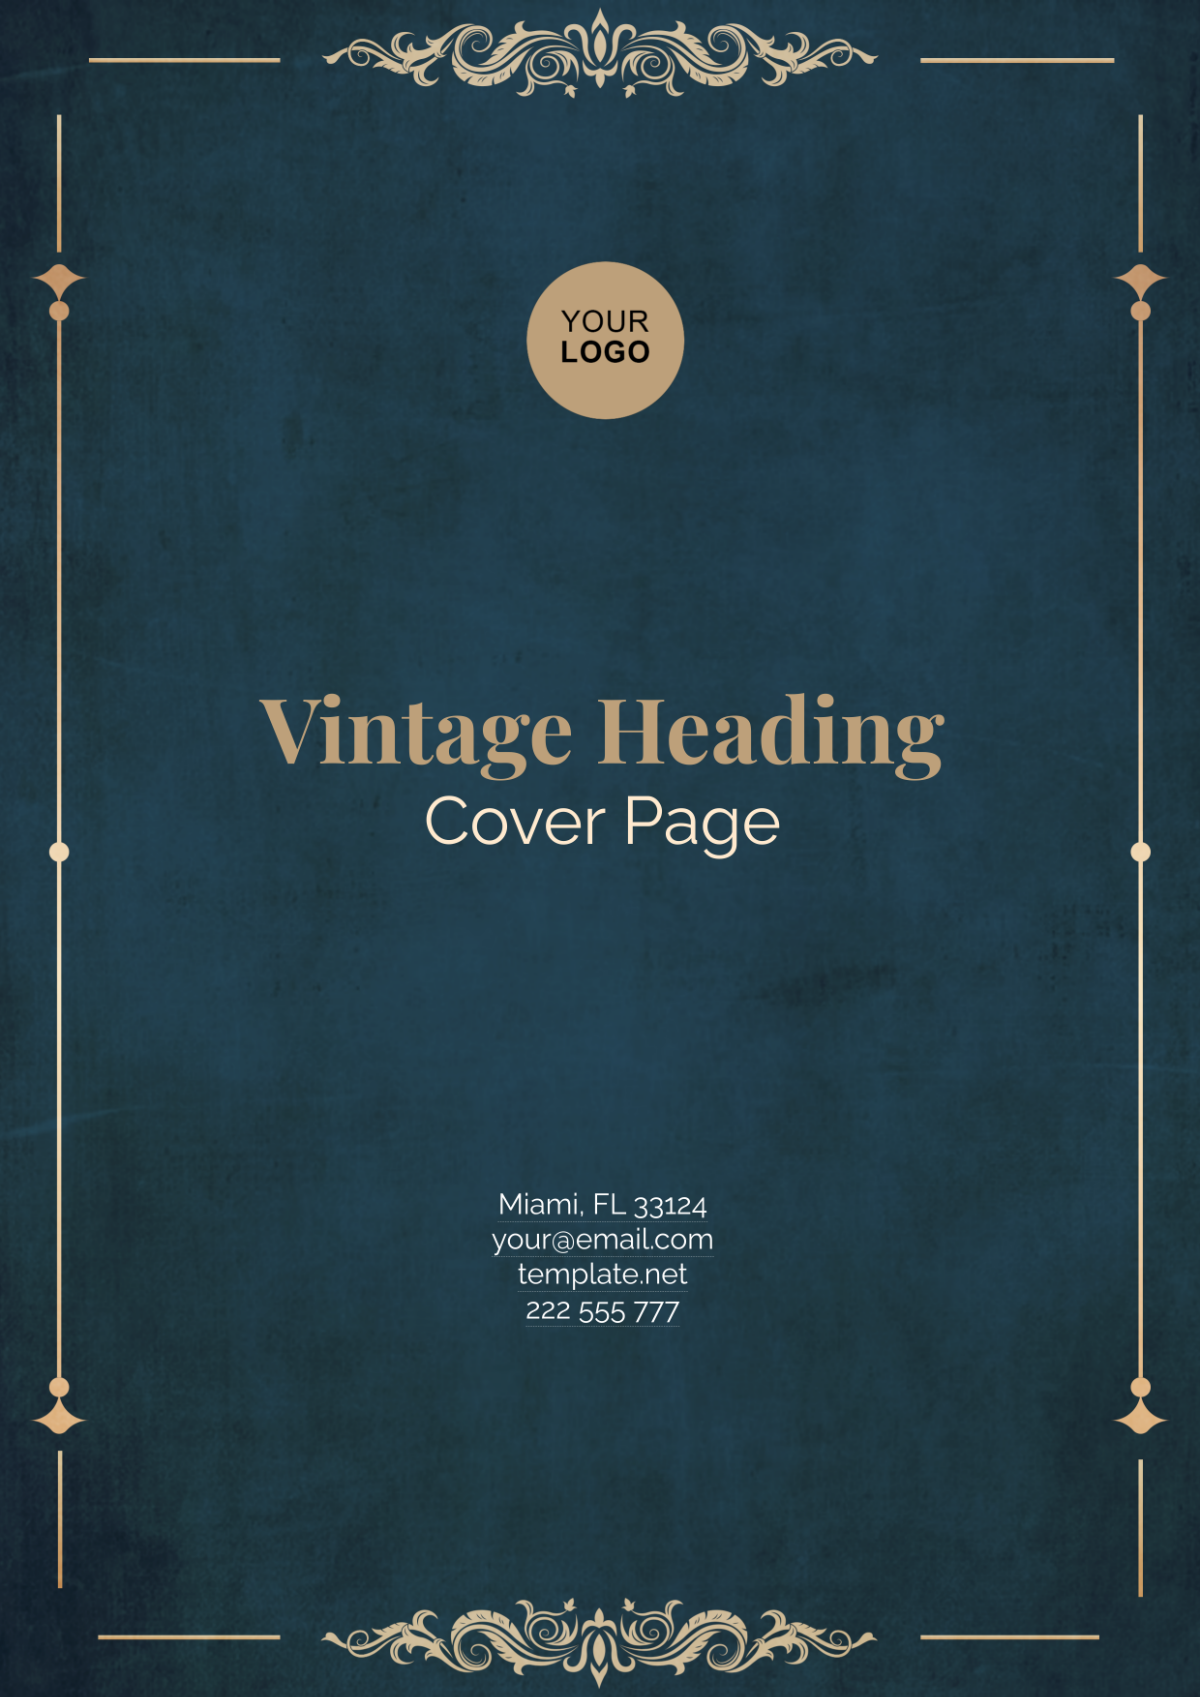 Free Vintage Heading Cover Page Template